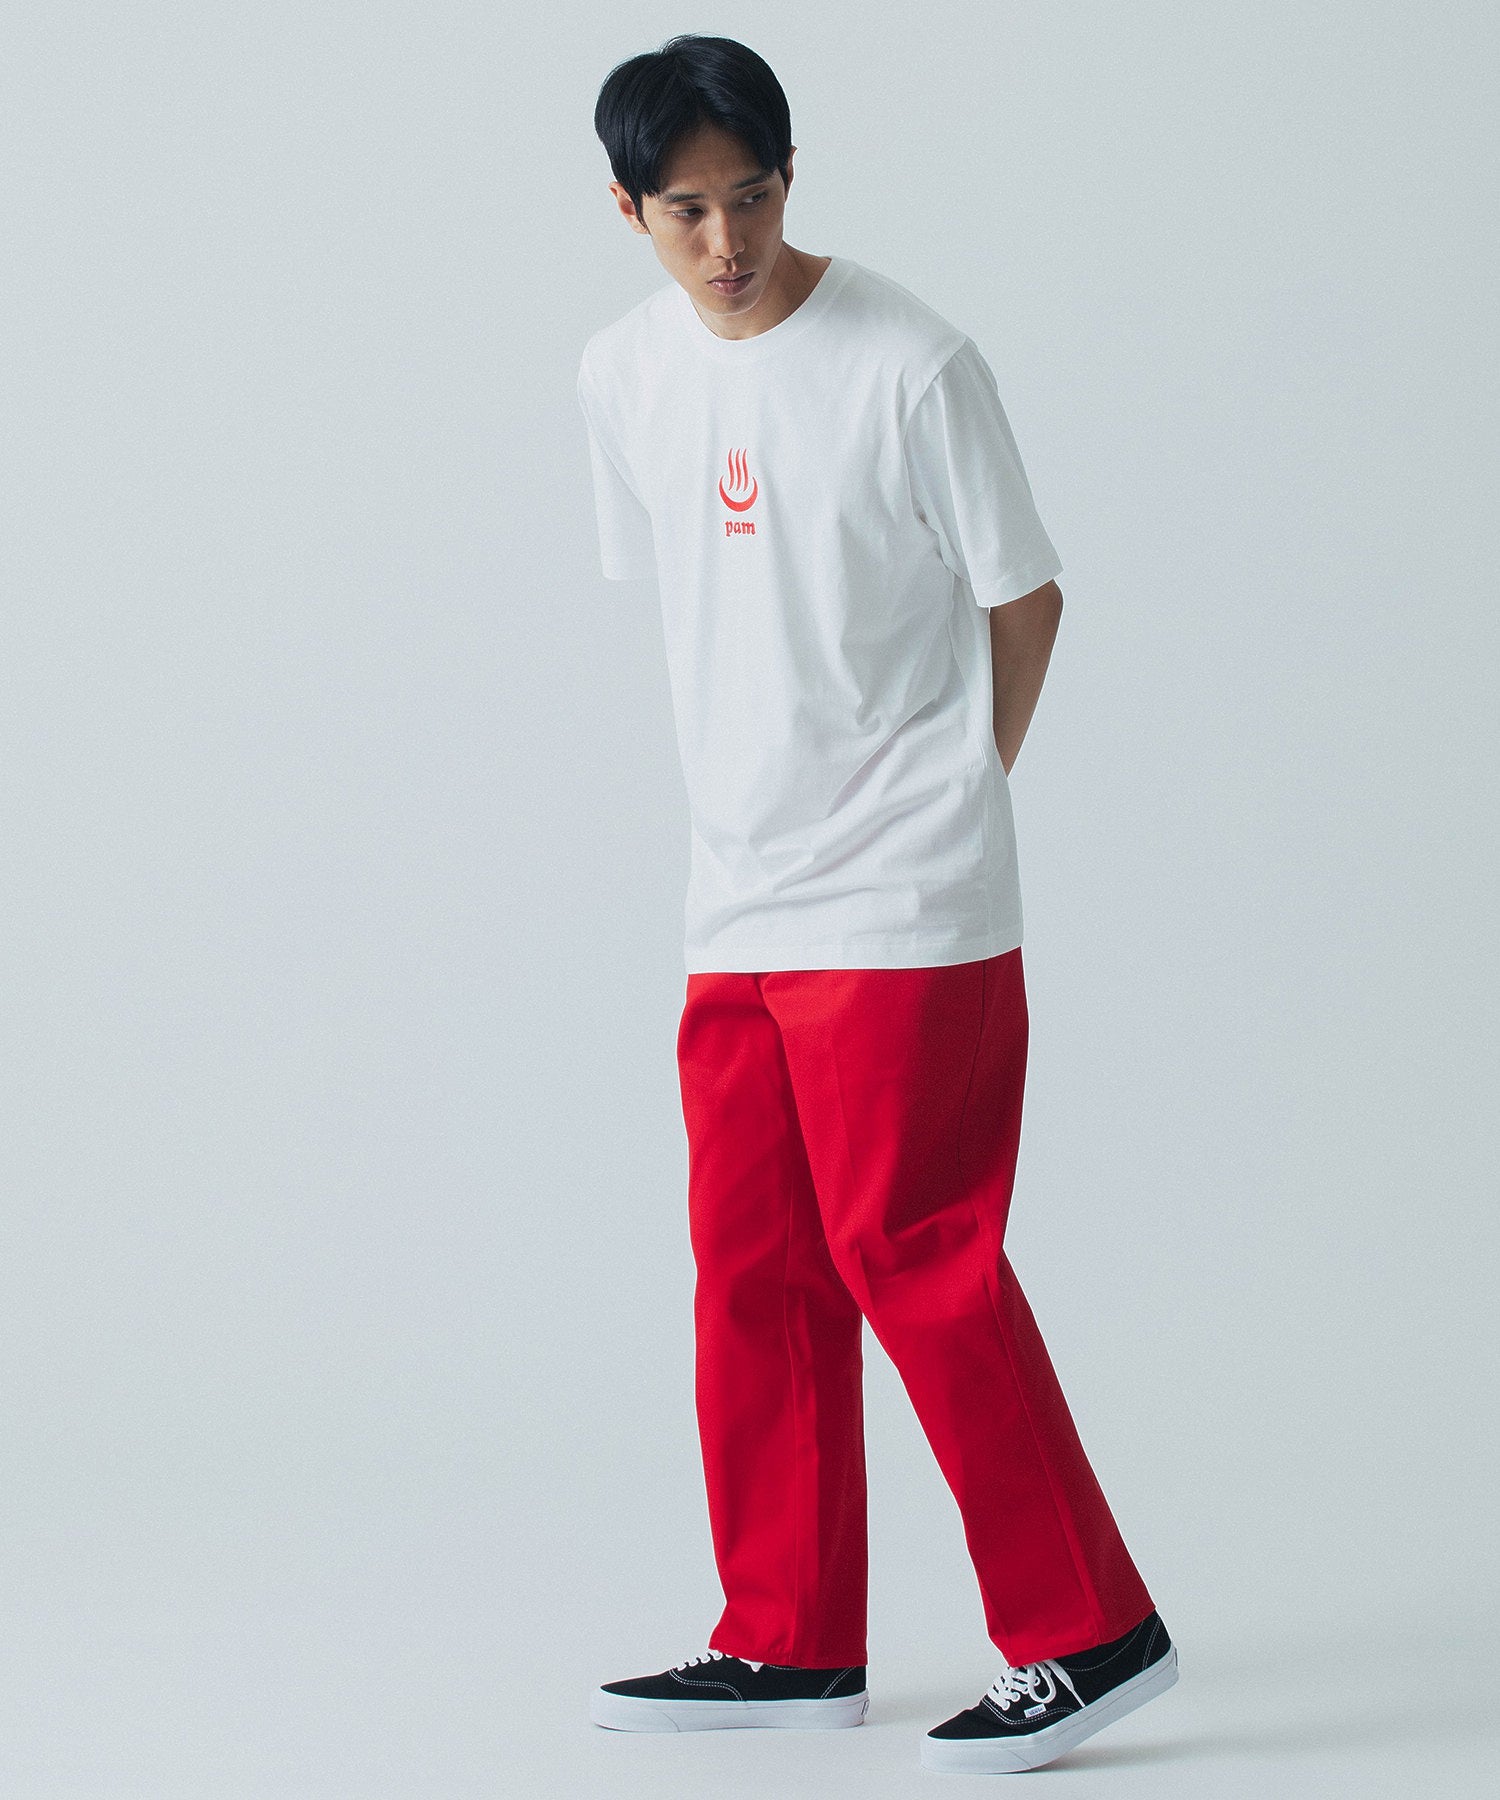 PERKS AND MINI/パークスアンドミニ/ONSEN SS TEE/1531/D